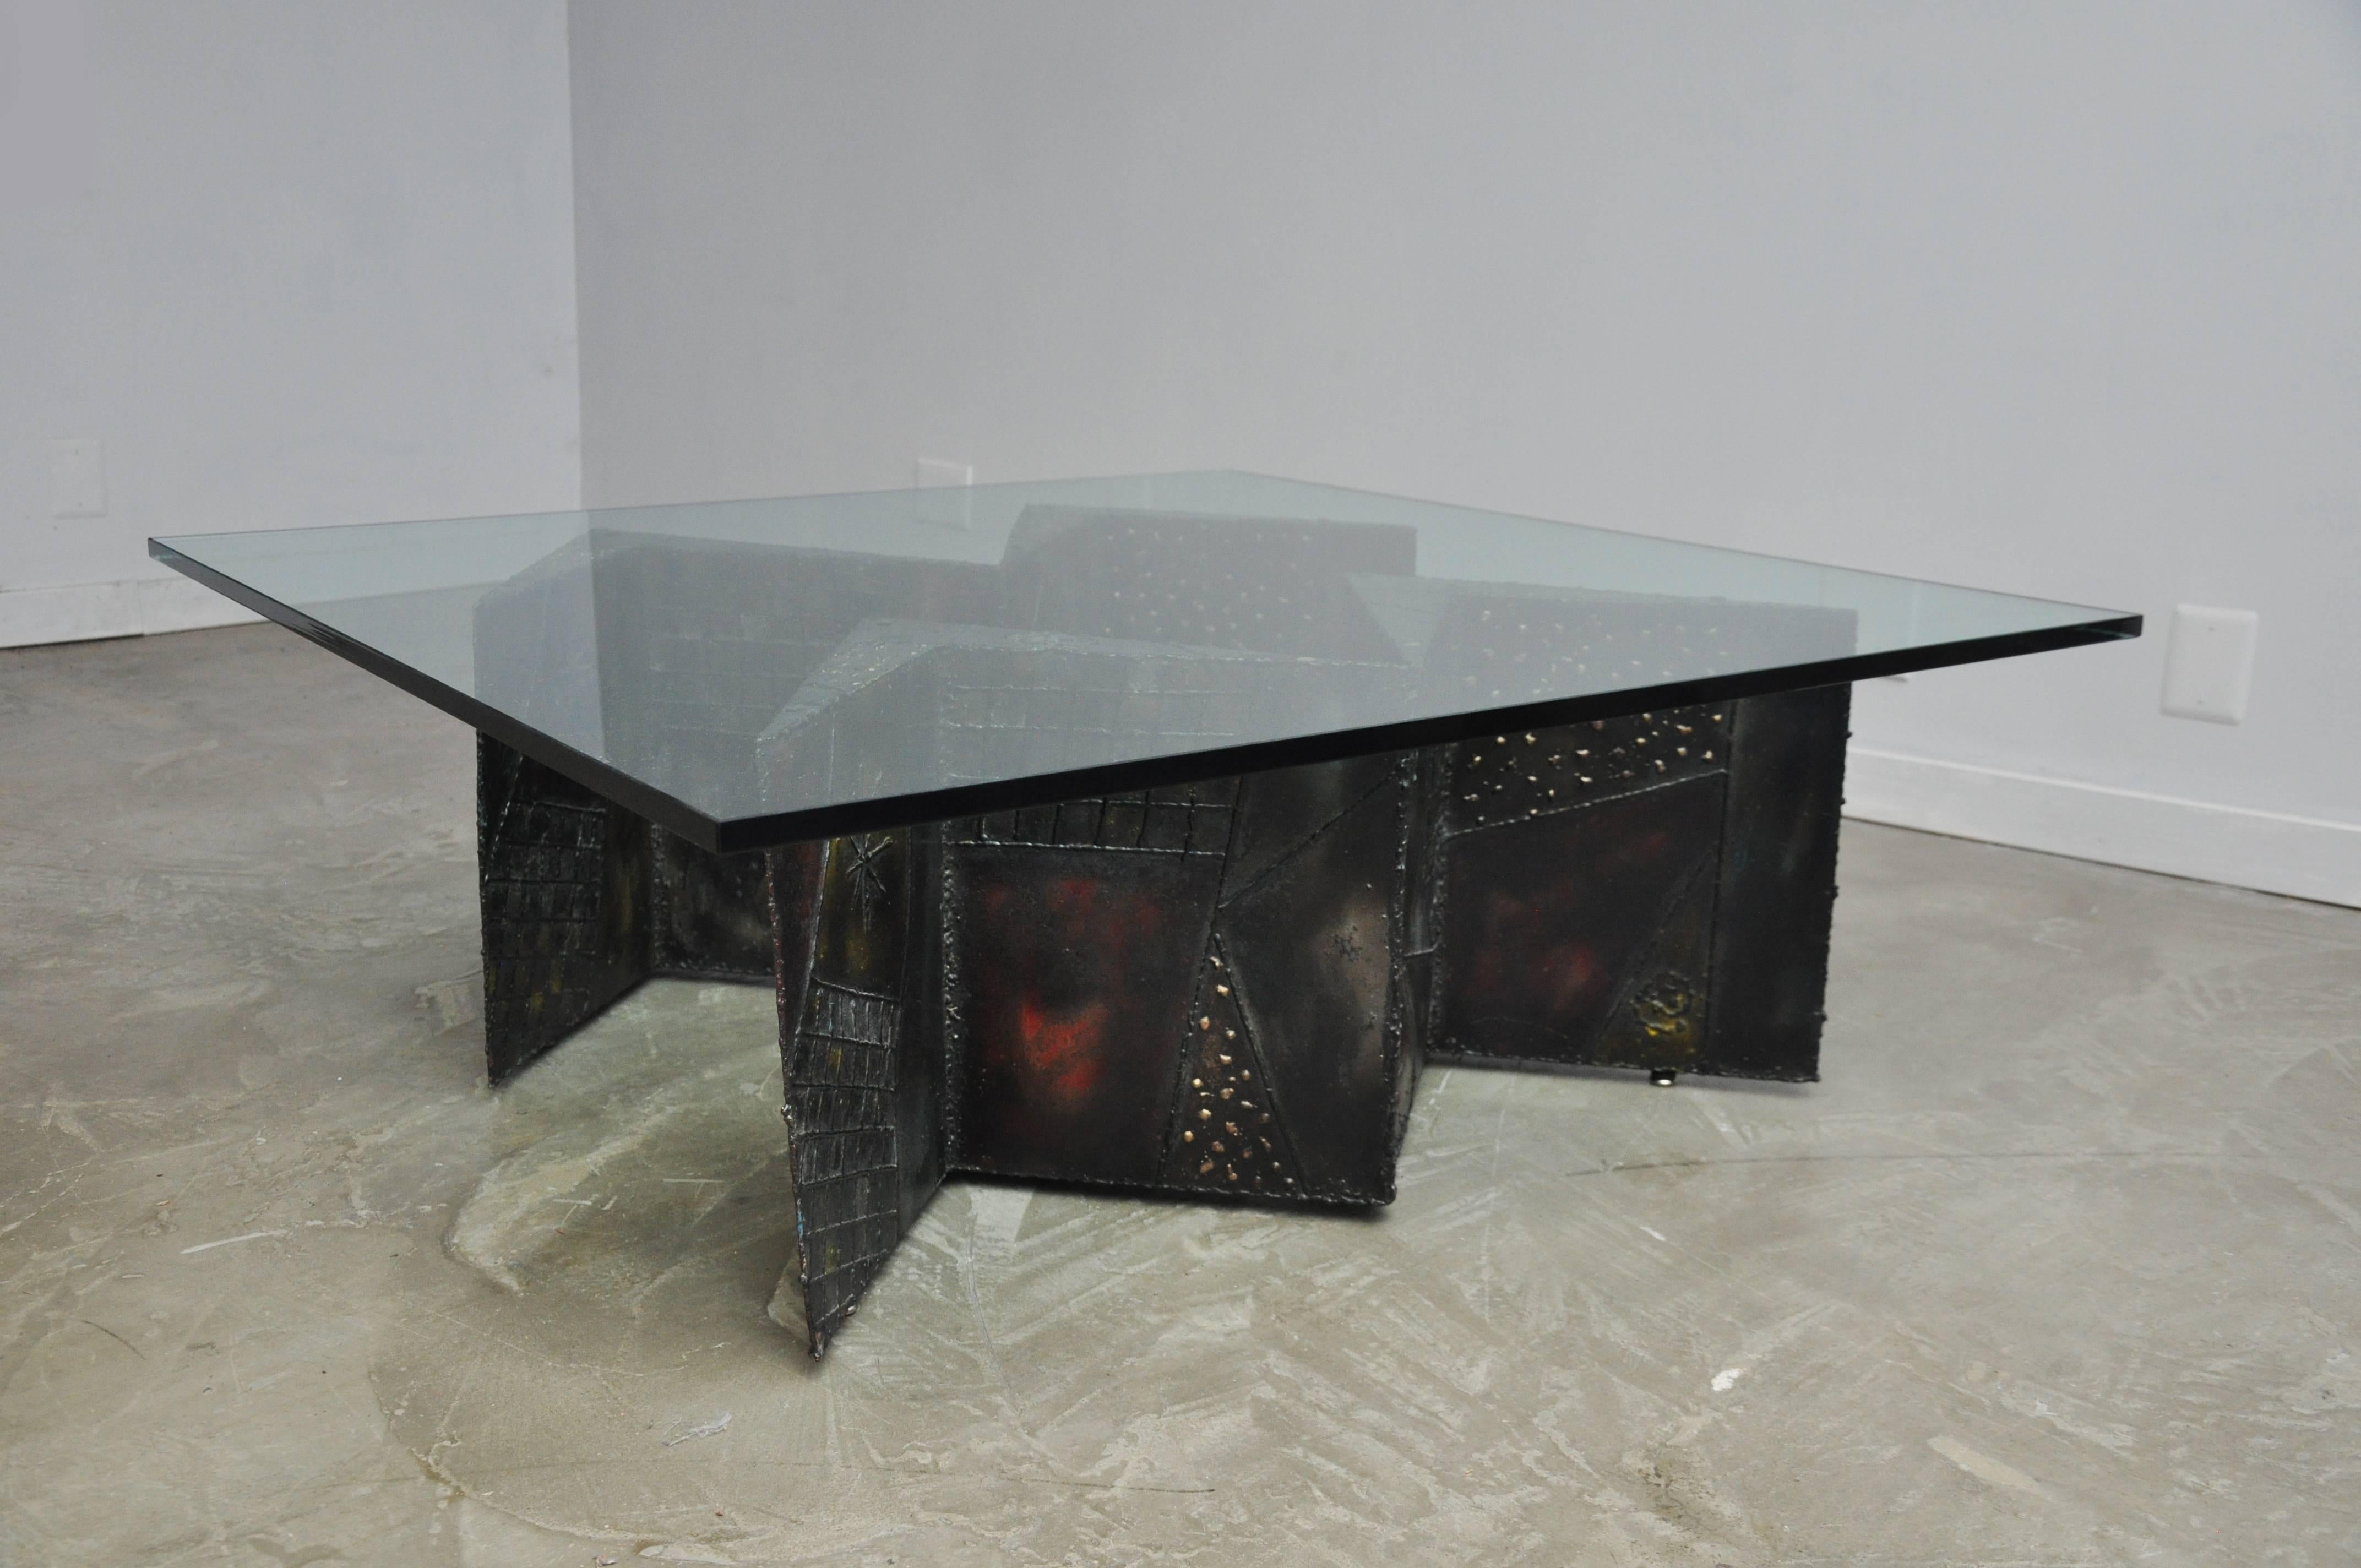 Large double zig zag pedestal coffee table by Paul Evans for Directional. Model PE-11. Sculpted and welded metal patchwork. Bronze patina accented by primary colors. New glass top.